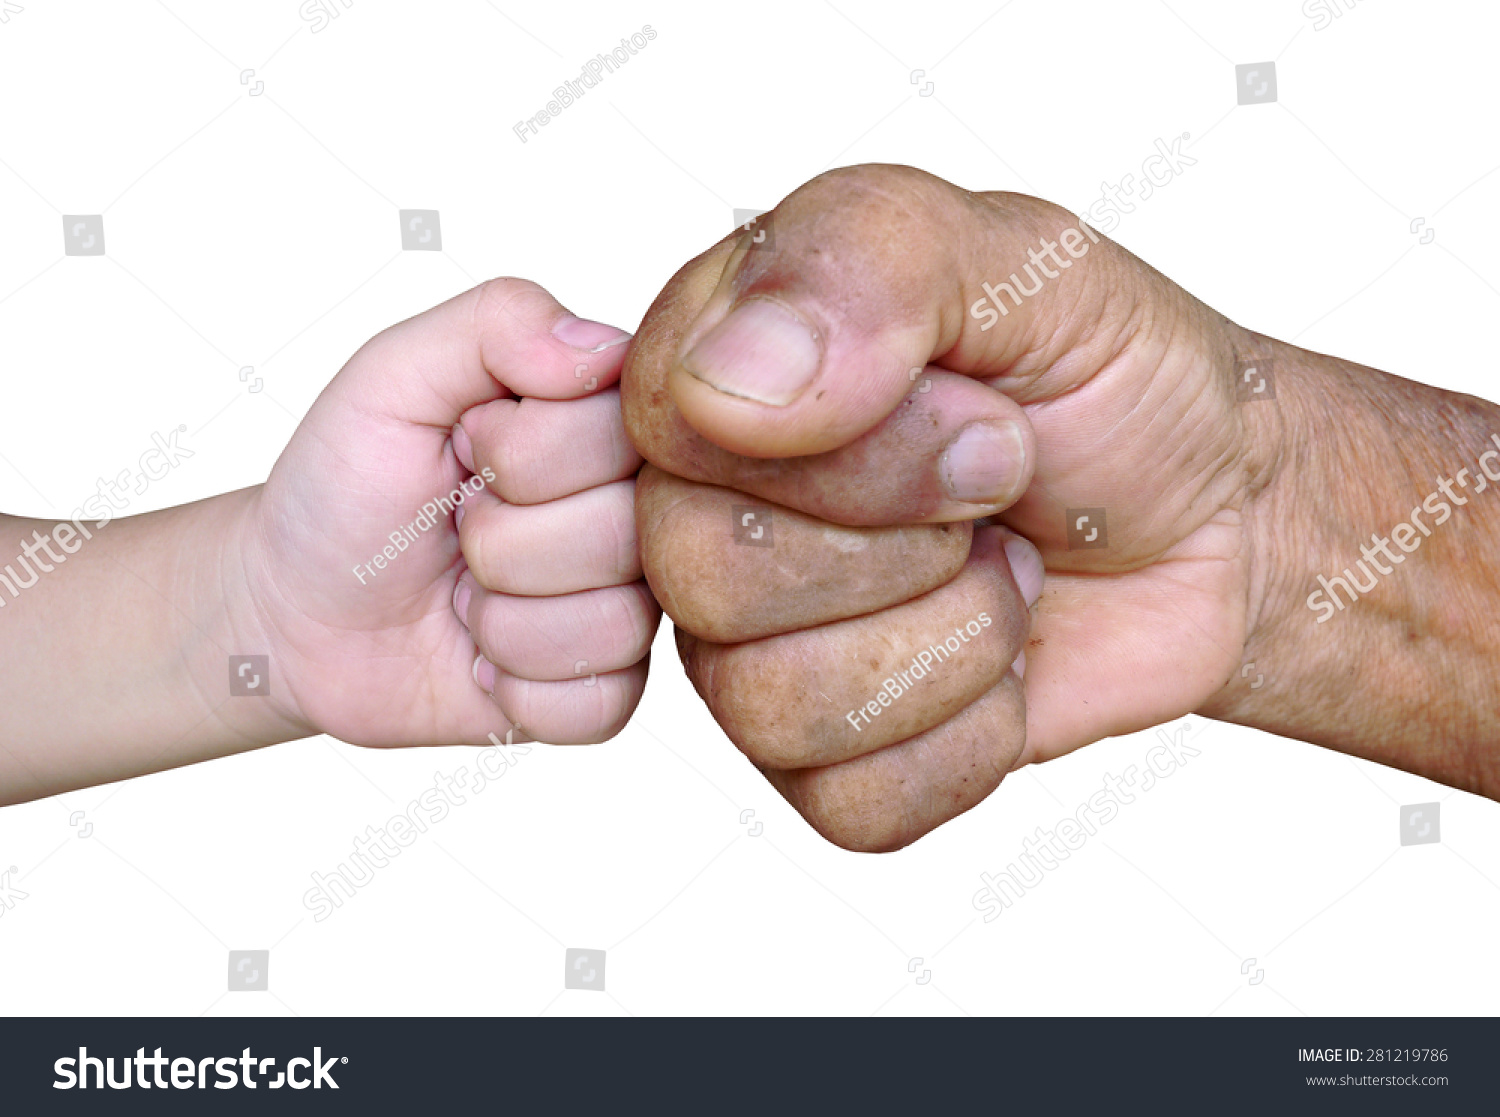 Fist Old Man Kid Together On Stock pic